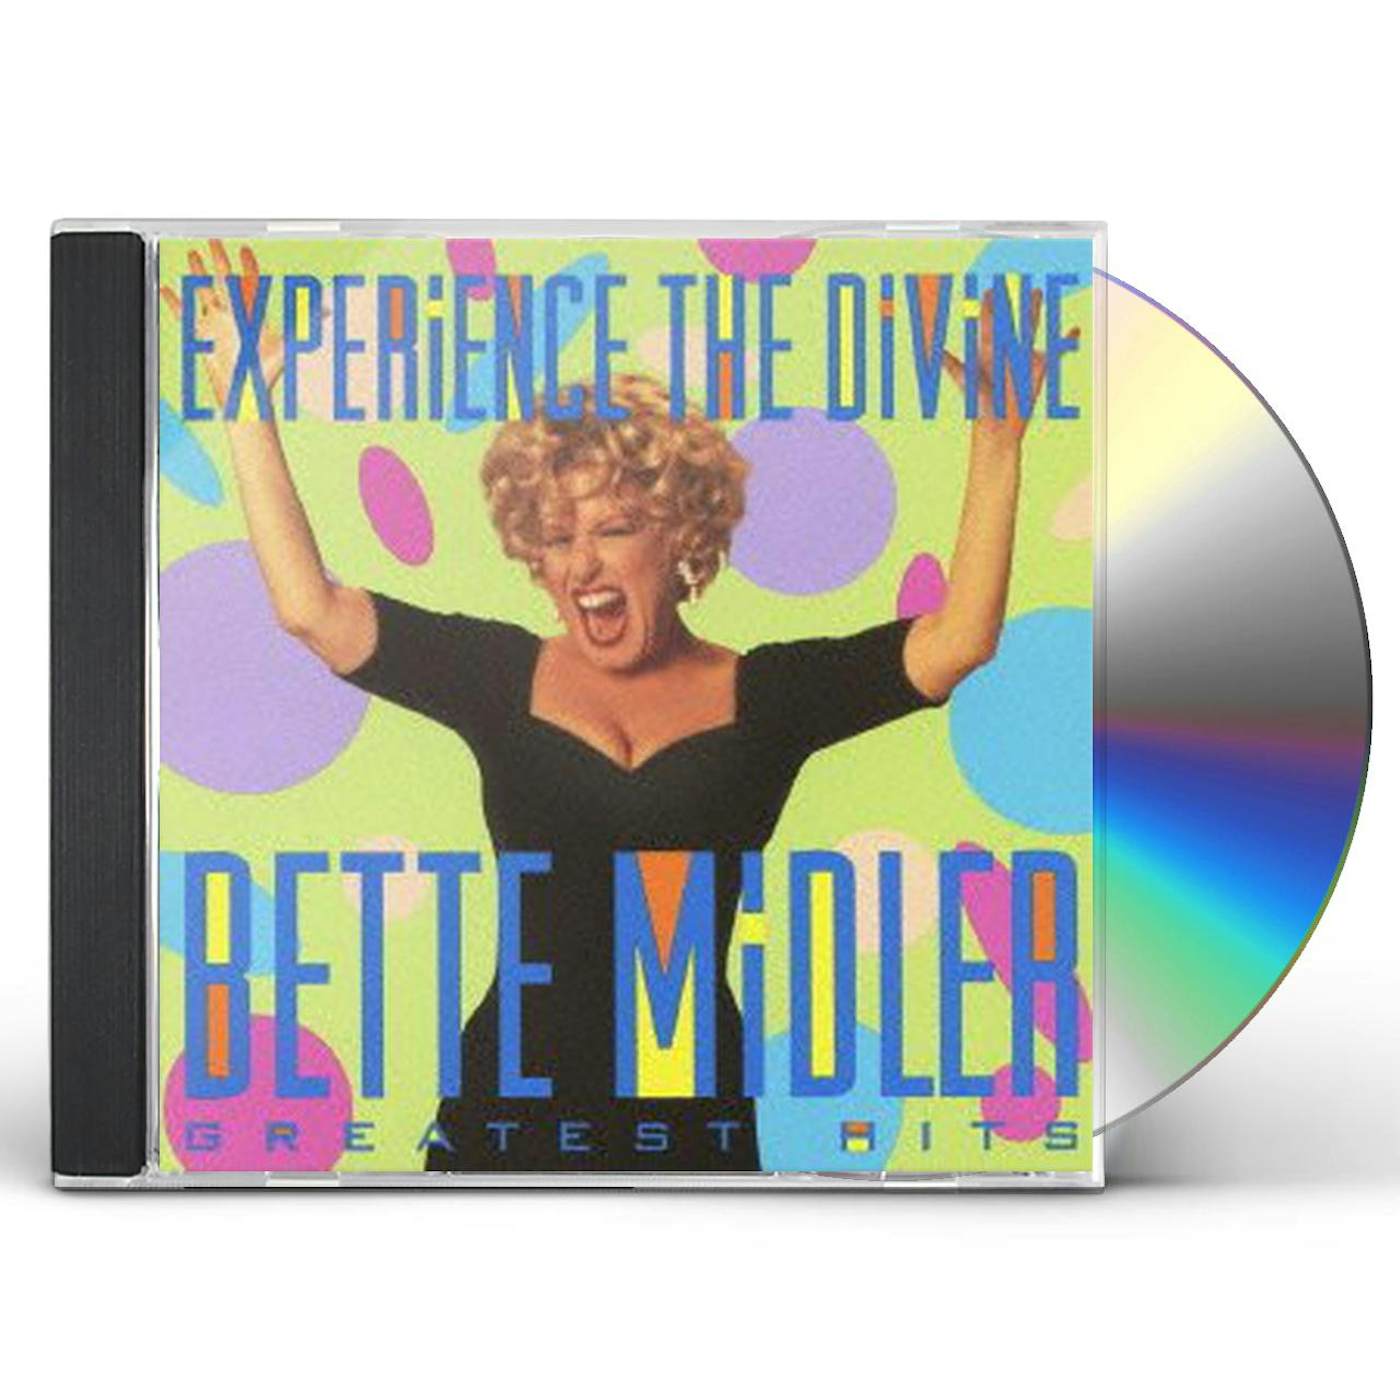 EXPERIENCE THE DIVINE BETTE MIDLER CD